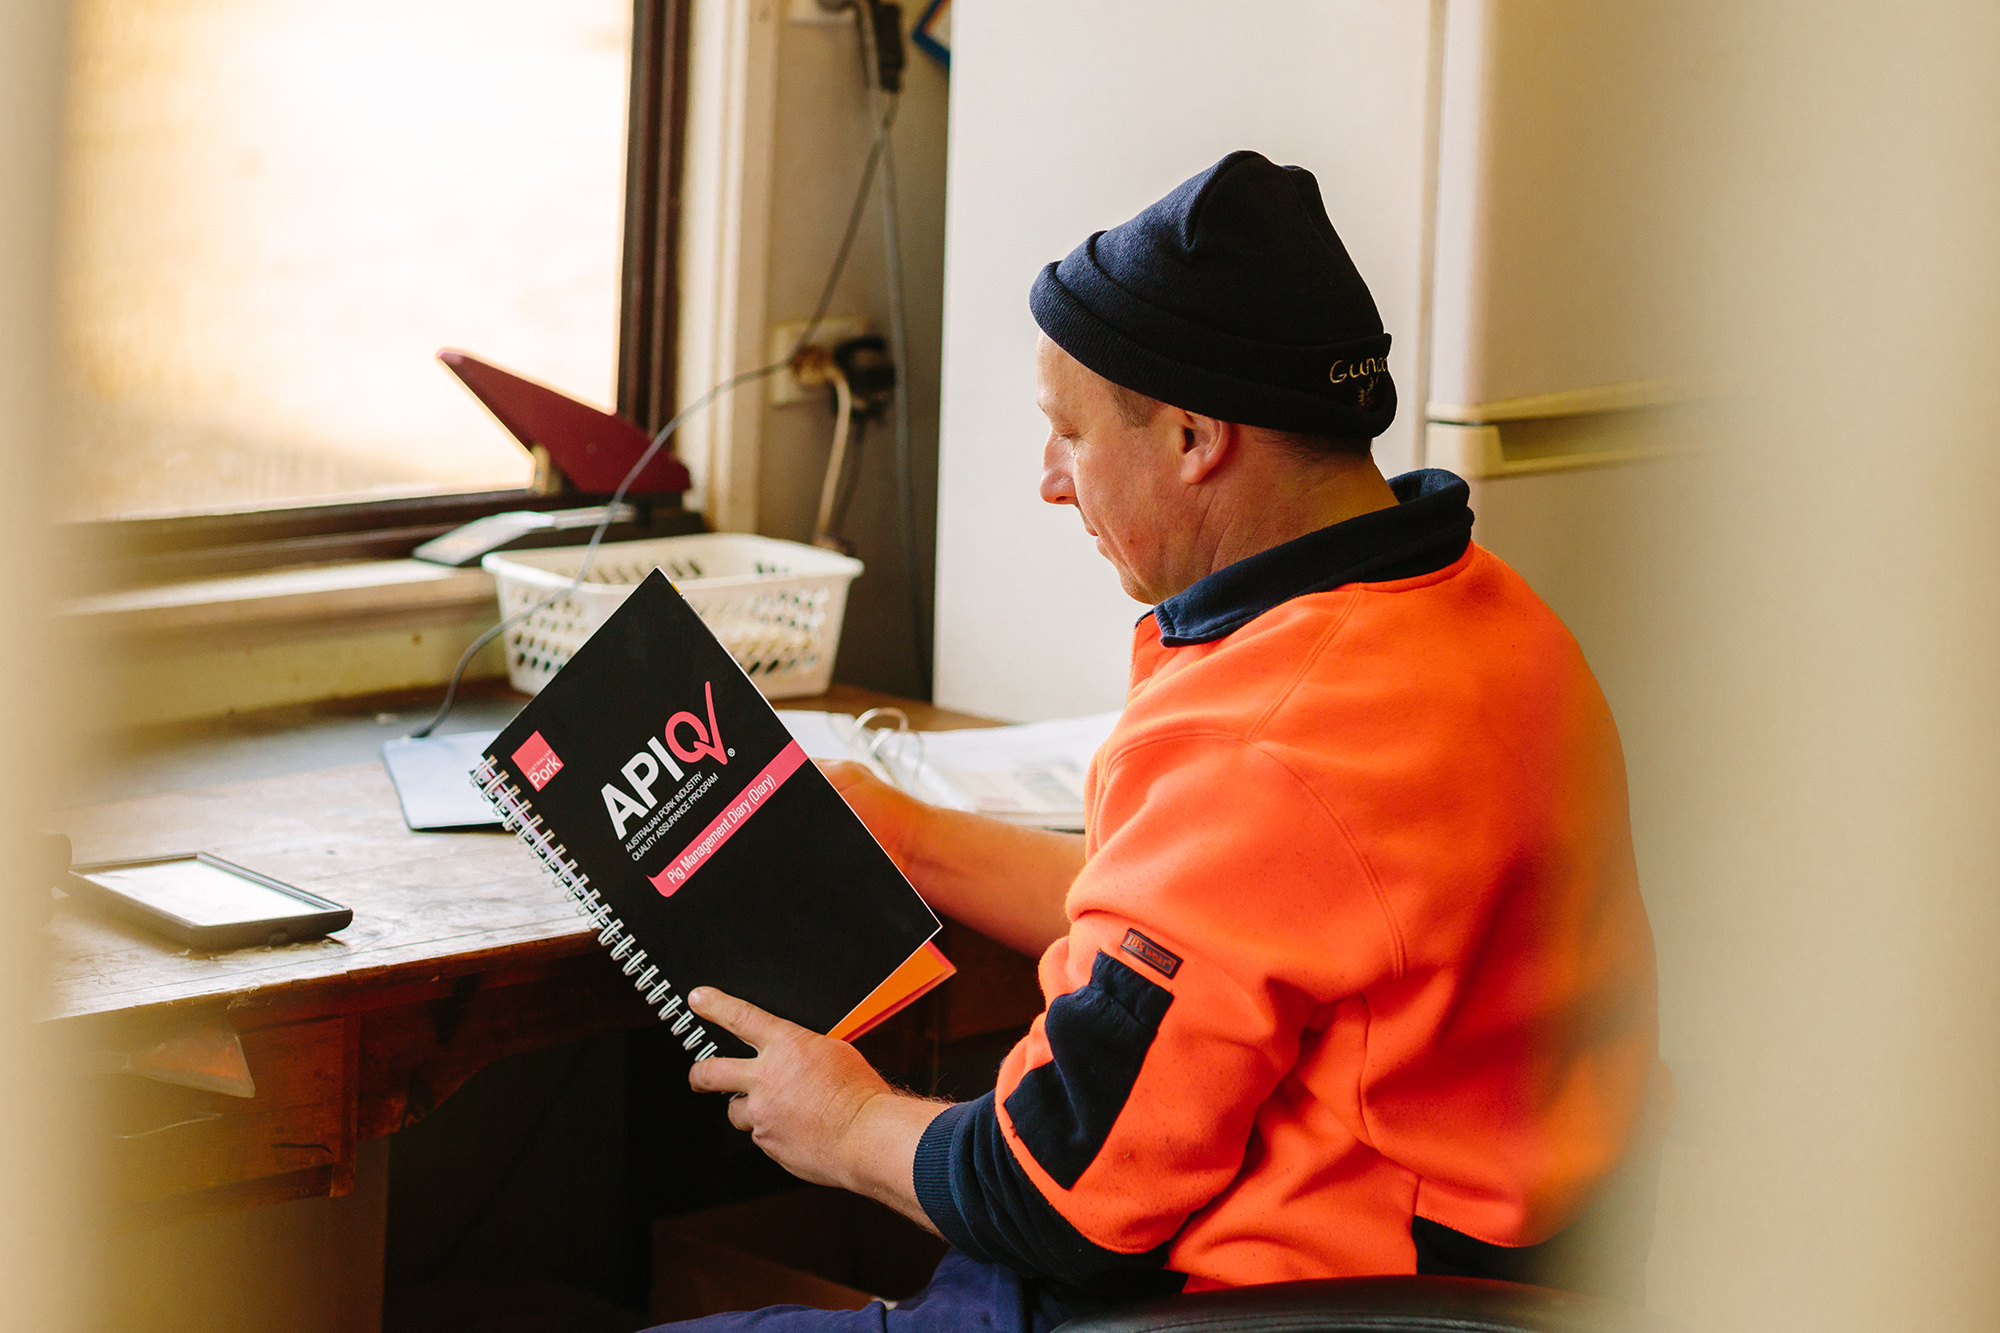 Worker with APIQ book